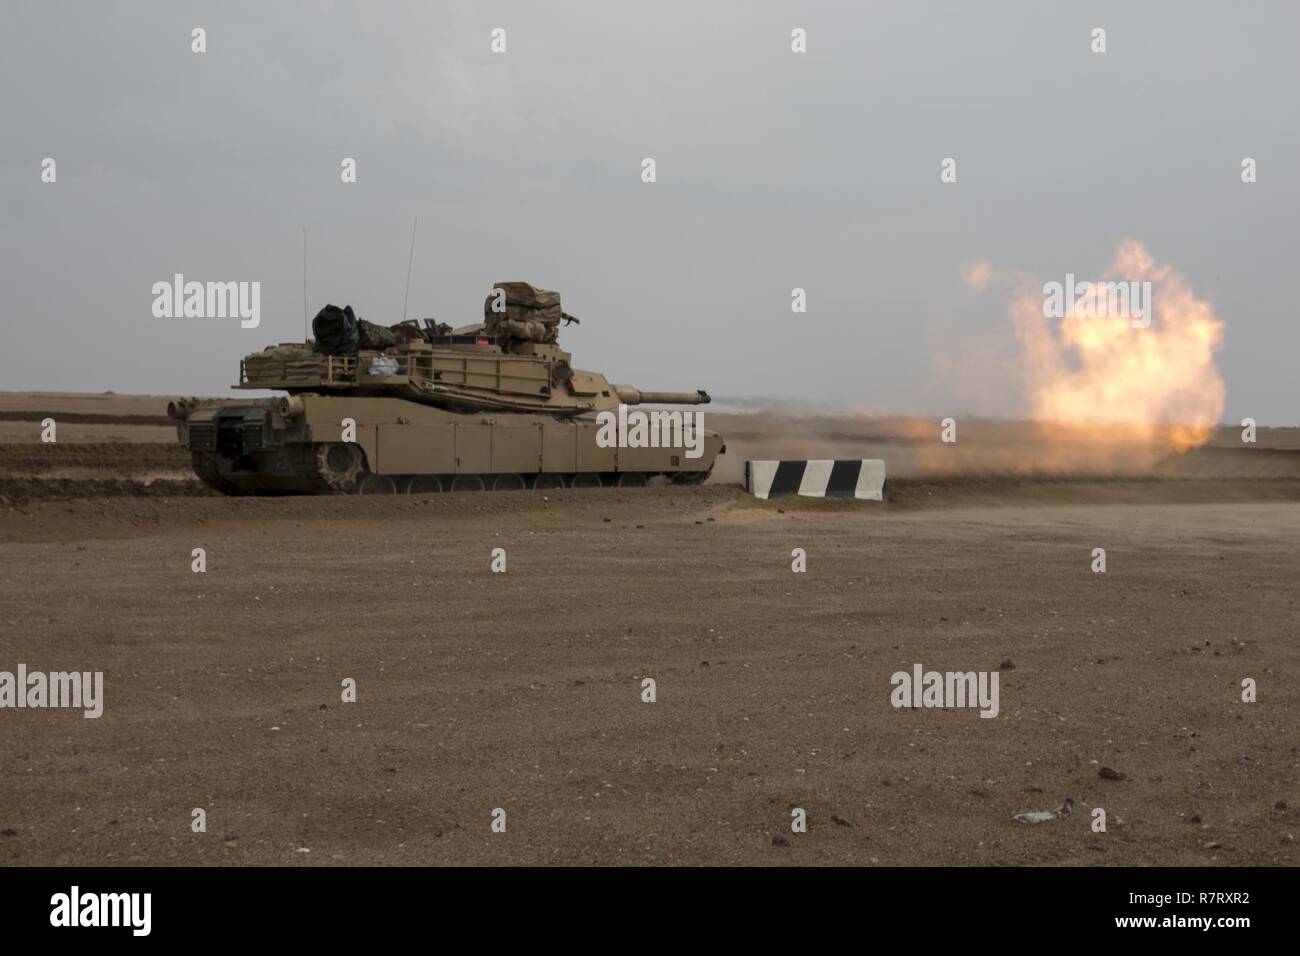 A 3rd Armored Brigade Combat Team, 1st Cavalry Division M1A2 Abrams Main Battle Tank engages targets during the brigade's Table VI qualifications at the Udairi Range Complex March 28. The brigade tank and Bradley crews spent about two weeks in the field conducting sustainment gunnery to ensure all the crews qualified at day and night fire to maintain proficiency. Stock Photo